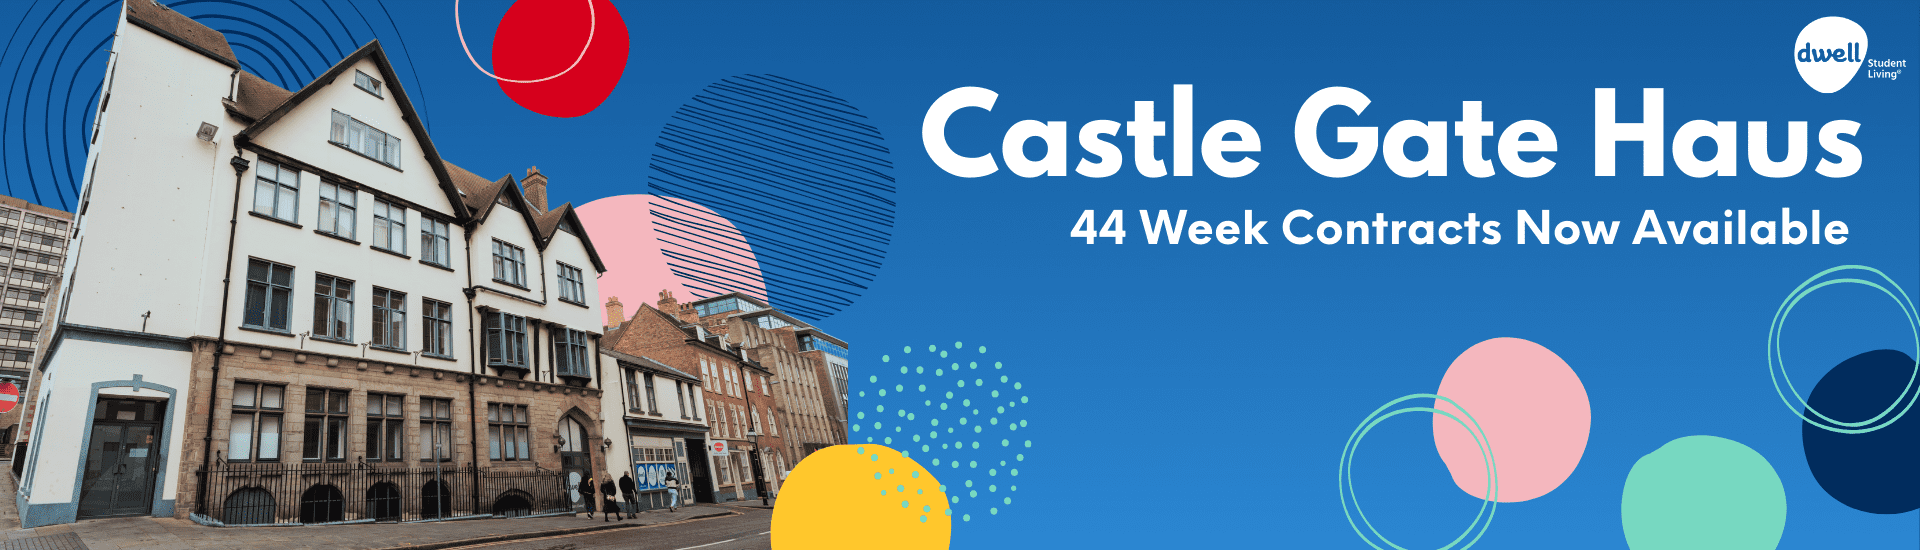 Castle Gate Haus- dwell Student Living- 44 Week Contracts Now Available